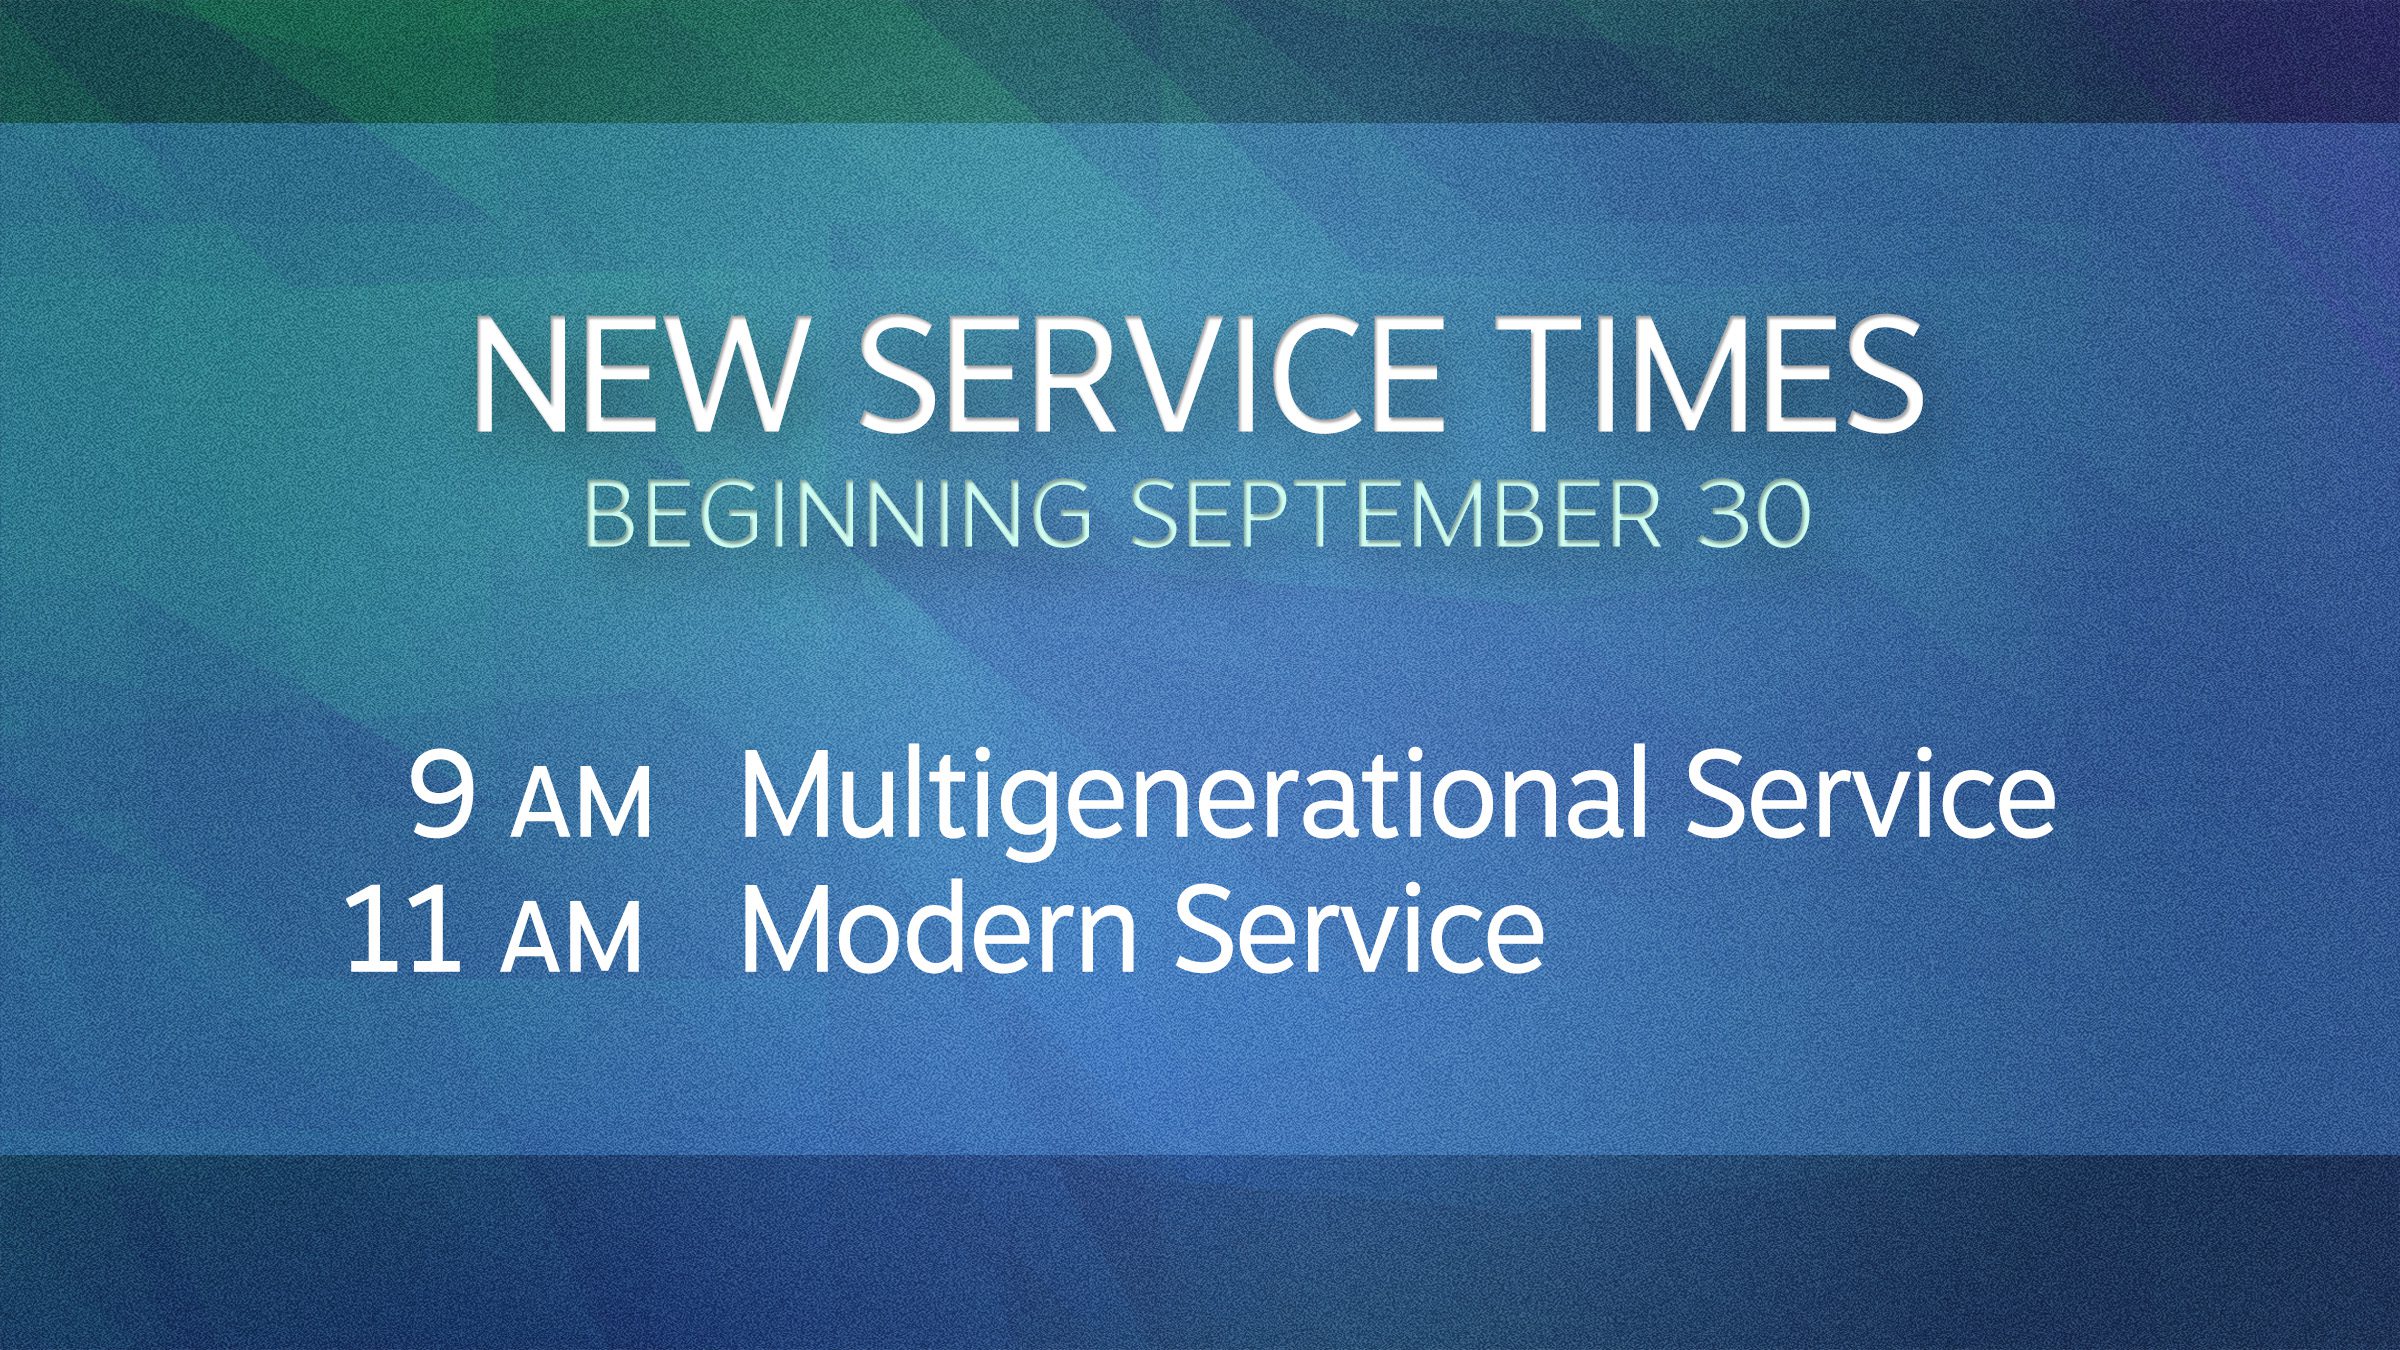 New Service Times Begin This Week